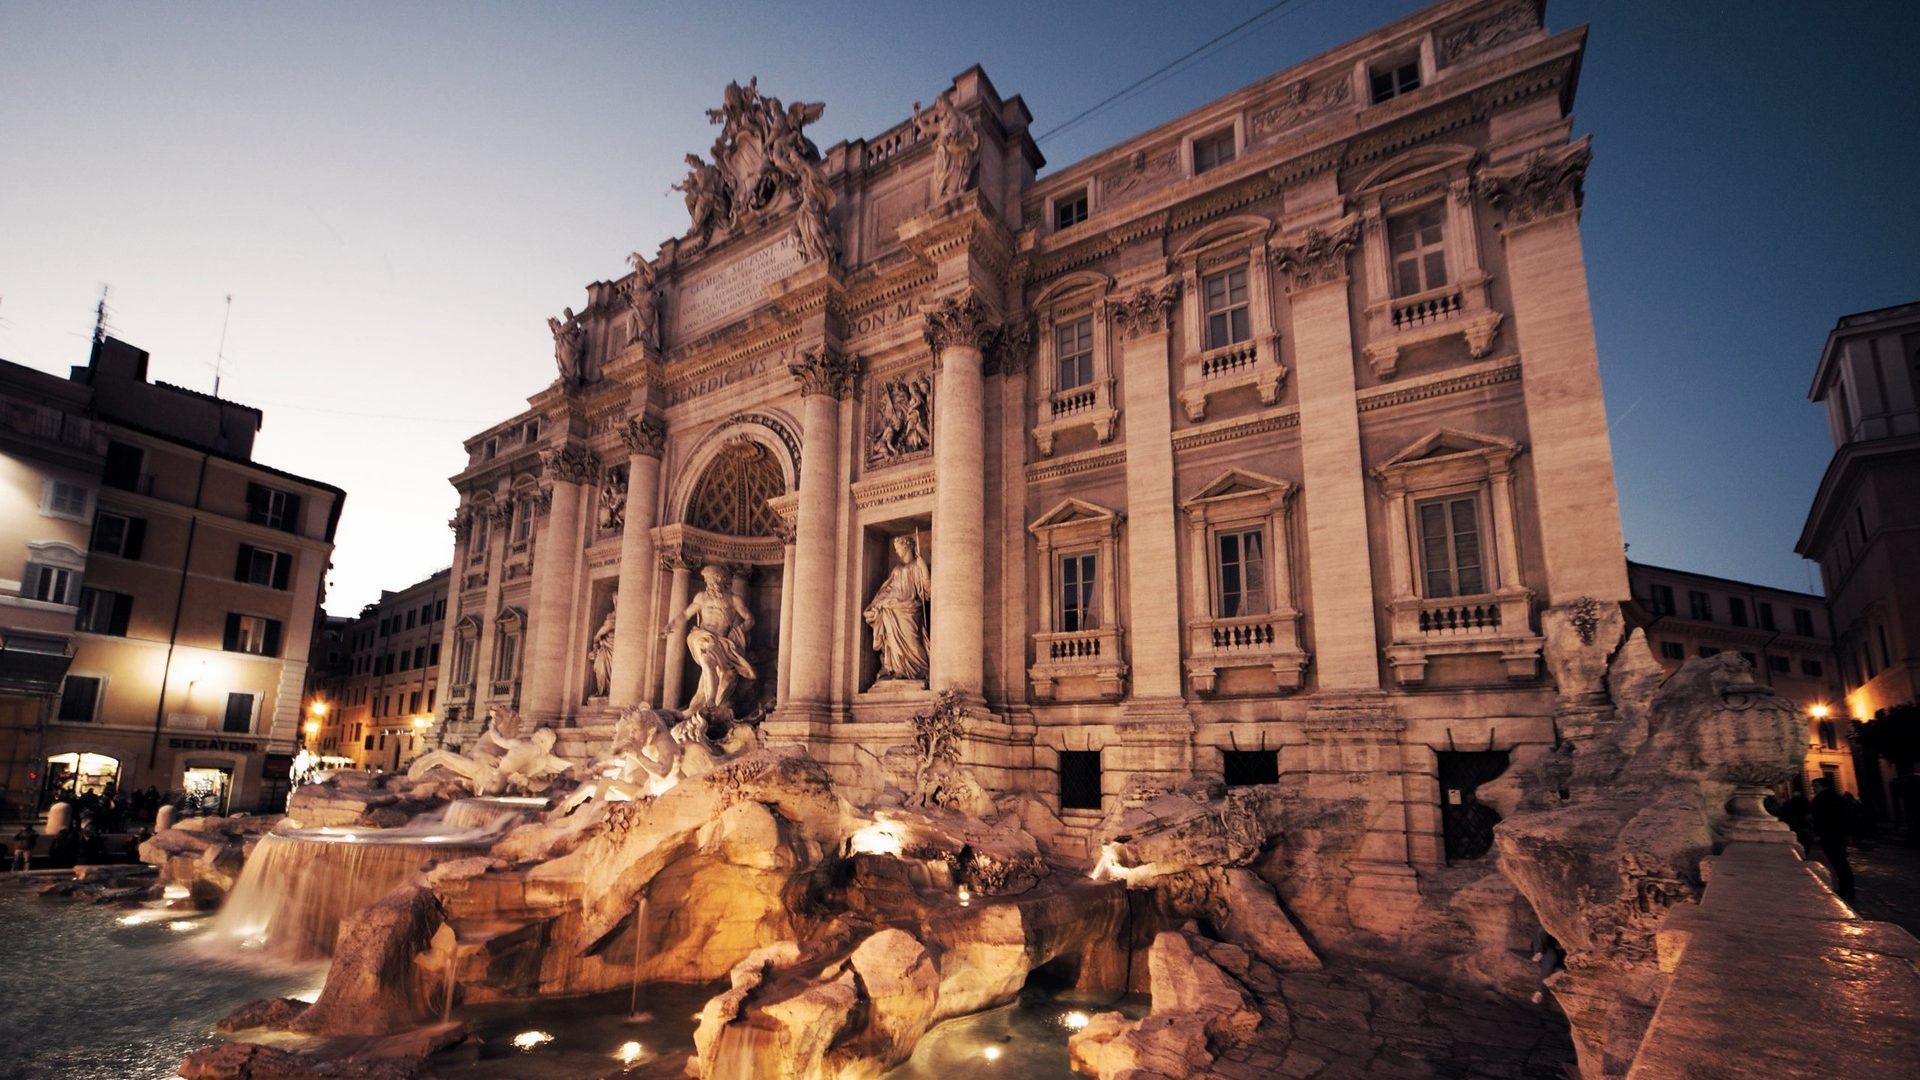 Best Angle Wallpaper Of The Trevi Fountain In Rome Italy